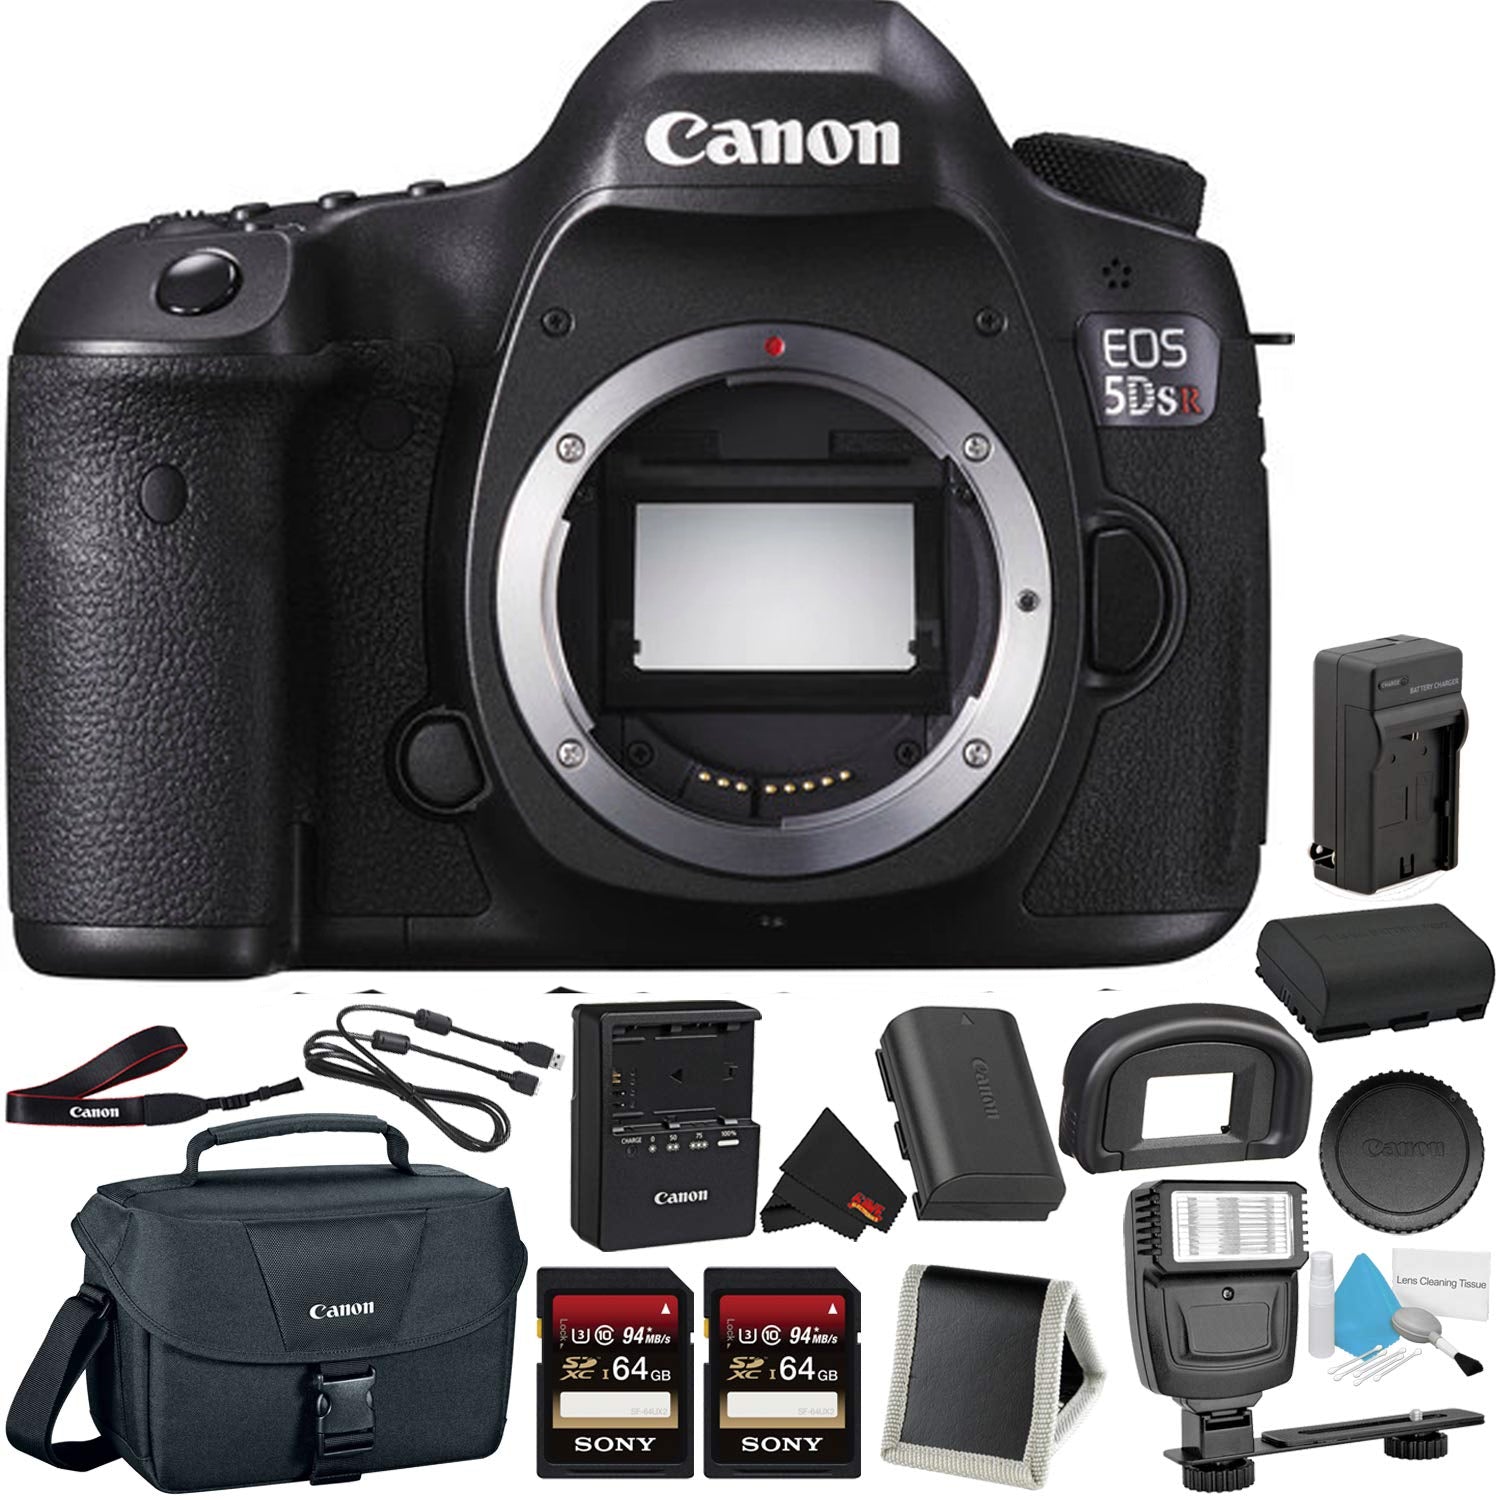 Canon EOS 5DS R Digital SLR Camera (Body Only)- Bundle with 2X 64GB Memory Cards + Spare Battery + Digital Slave Flash +